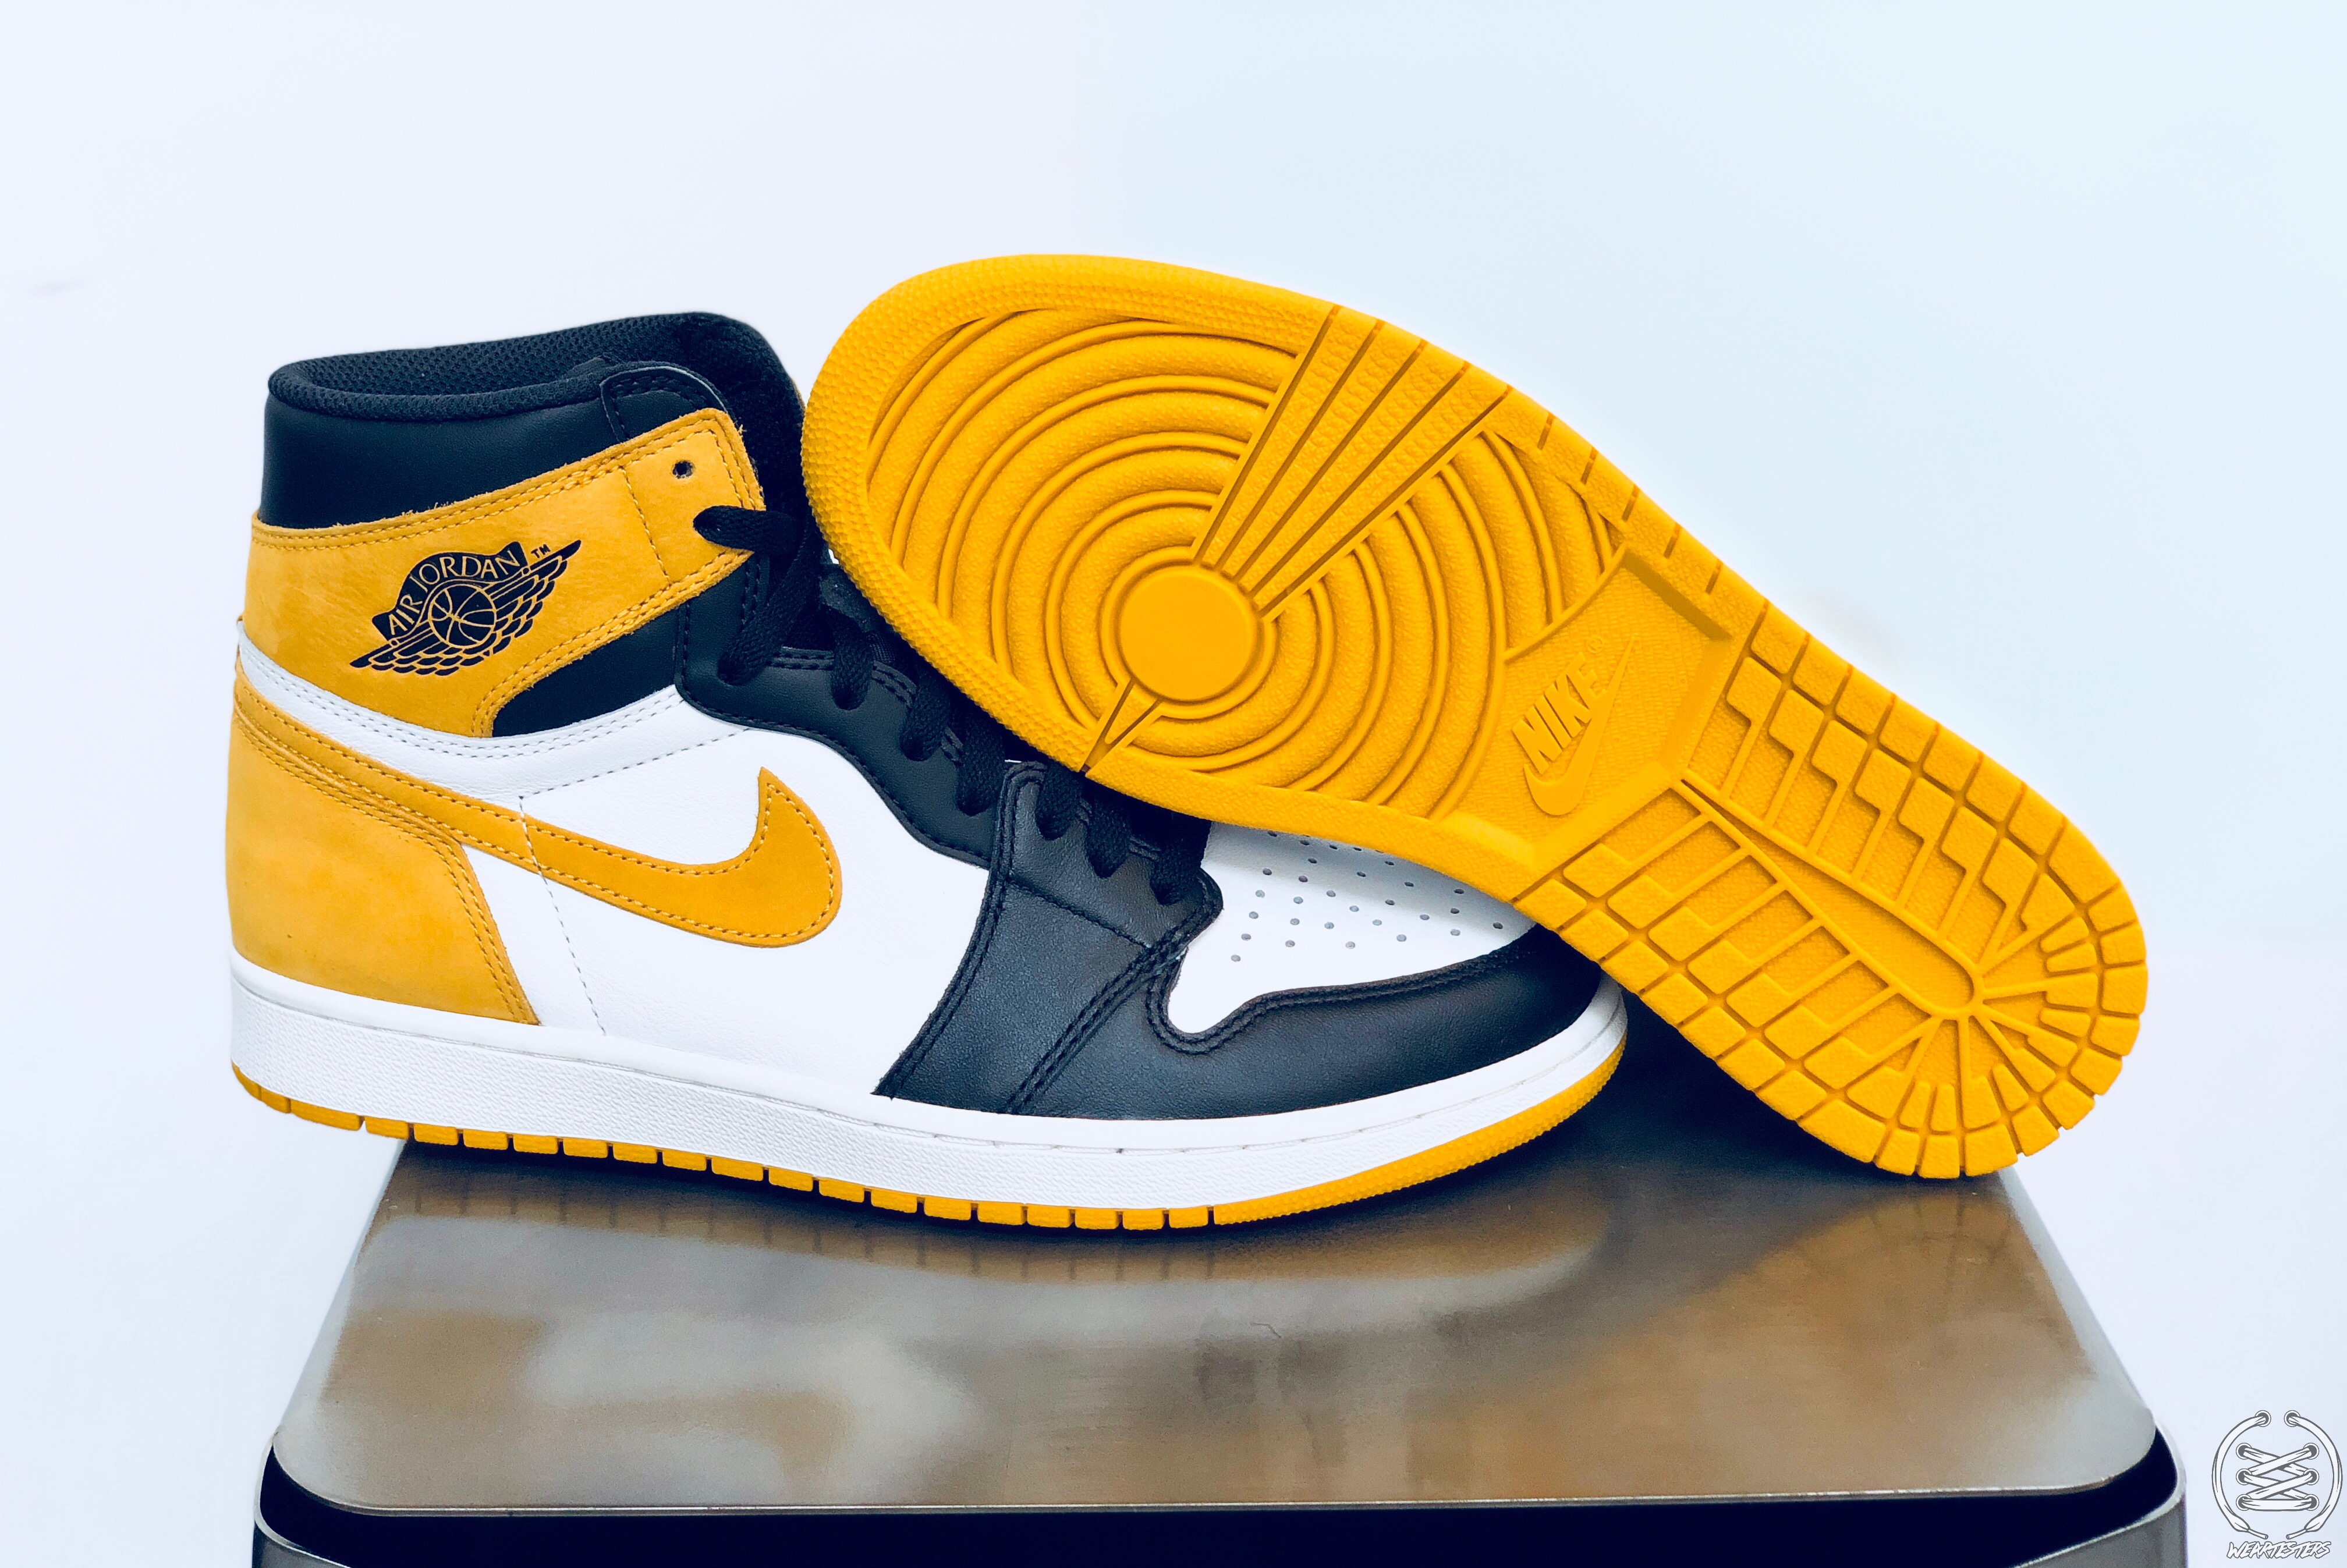 Air Jordan 1 Yellow Ochre Best Hand in the Game collection 1